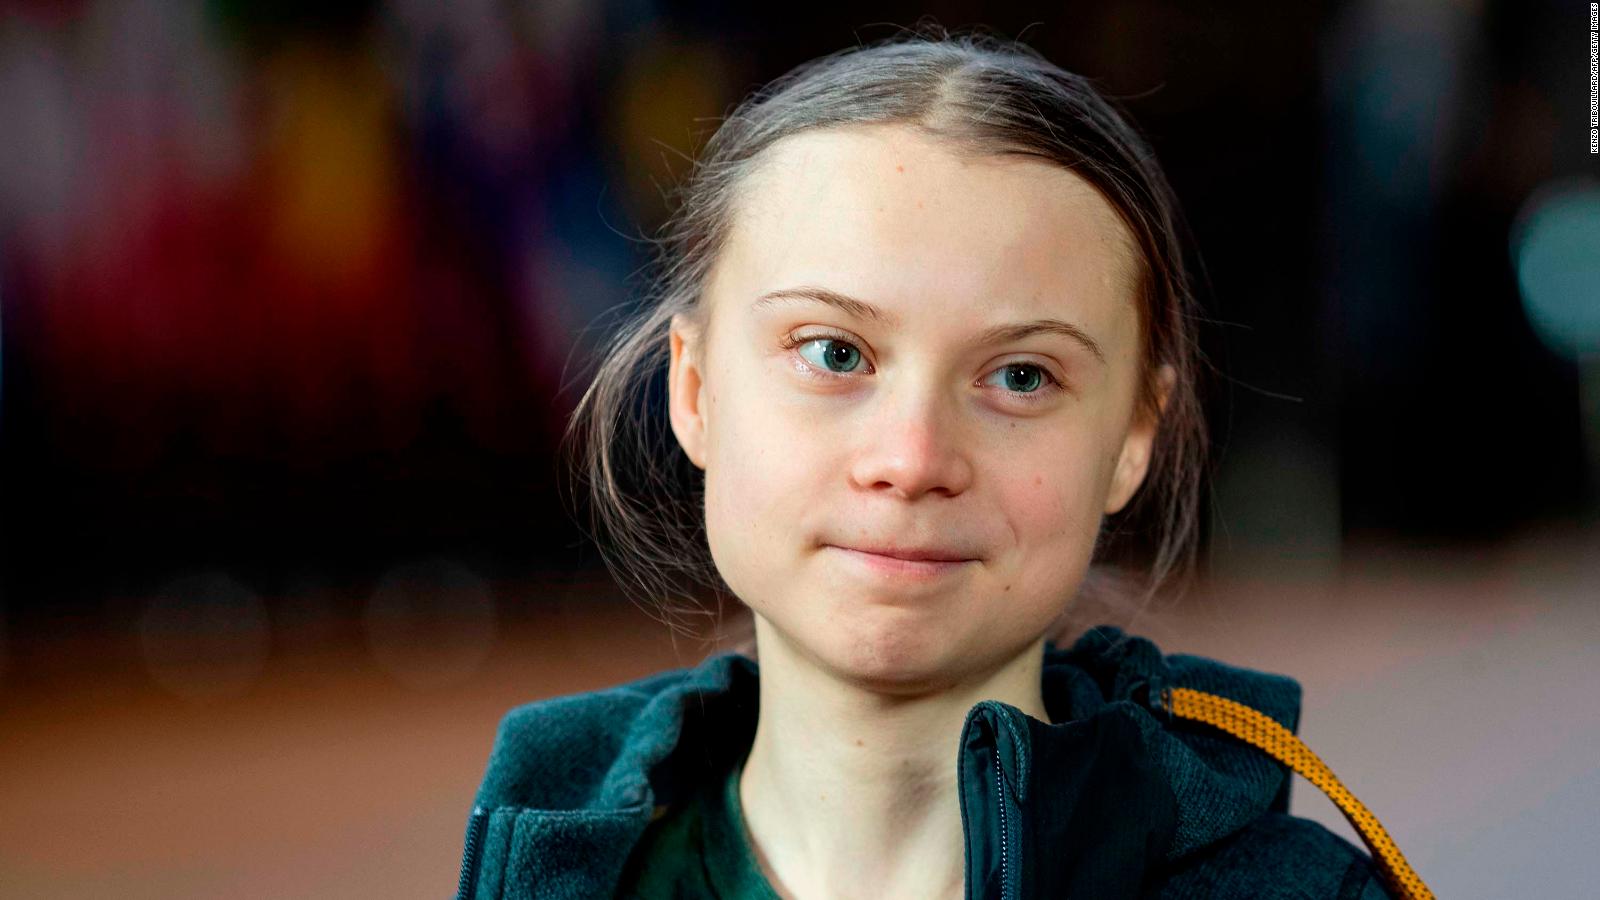 greta thunberg urges public to listen to the experts 2020